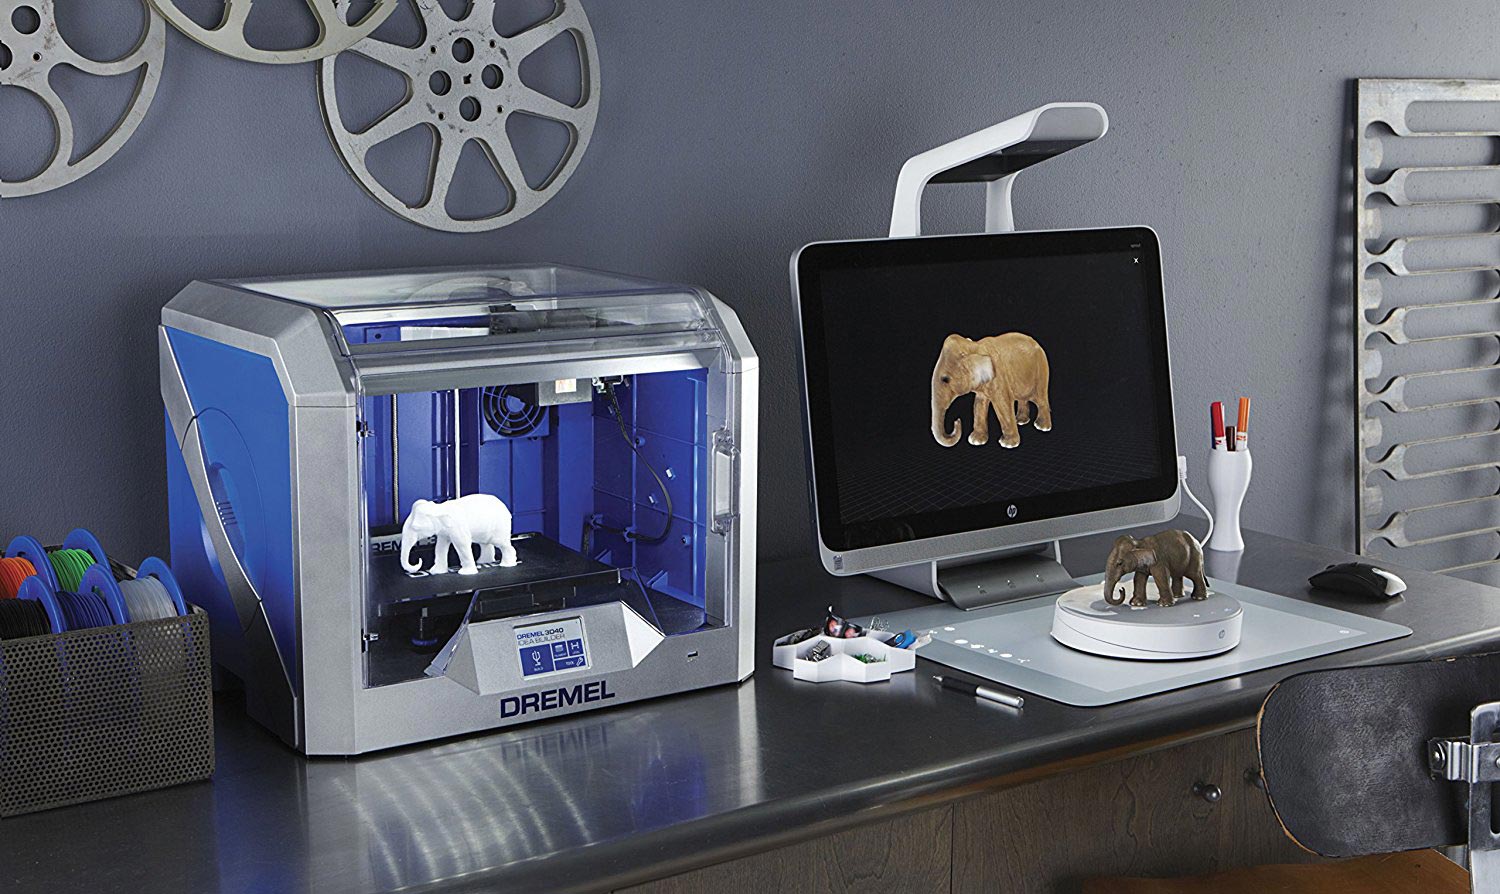 DigiLab 3D40 Review: A Good 3D Printer with Pricey Materials | Tom's Guide